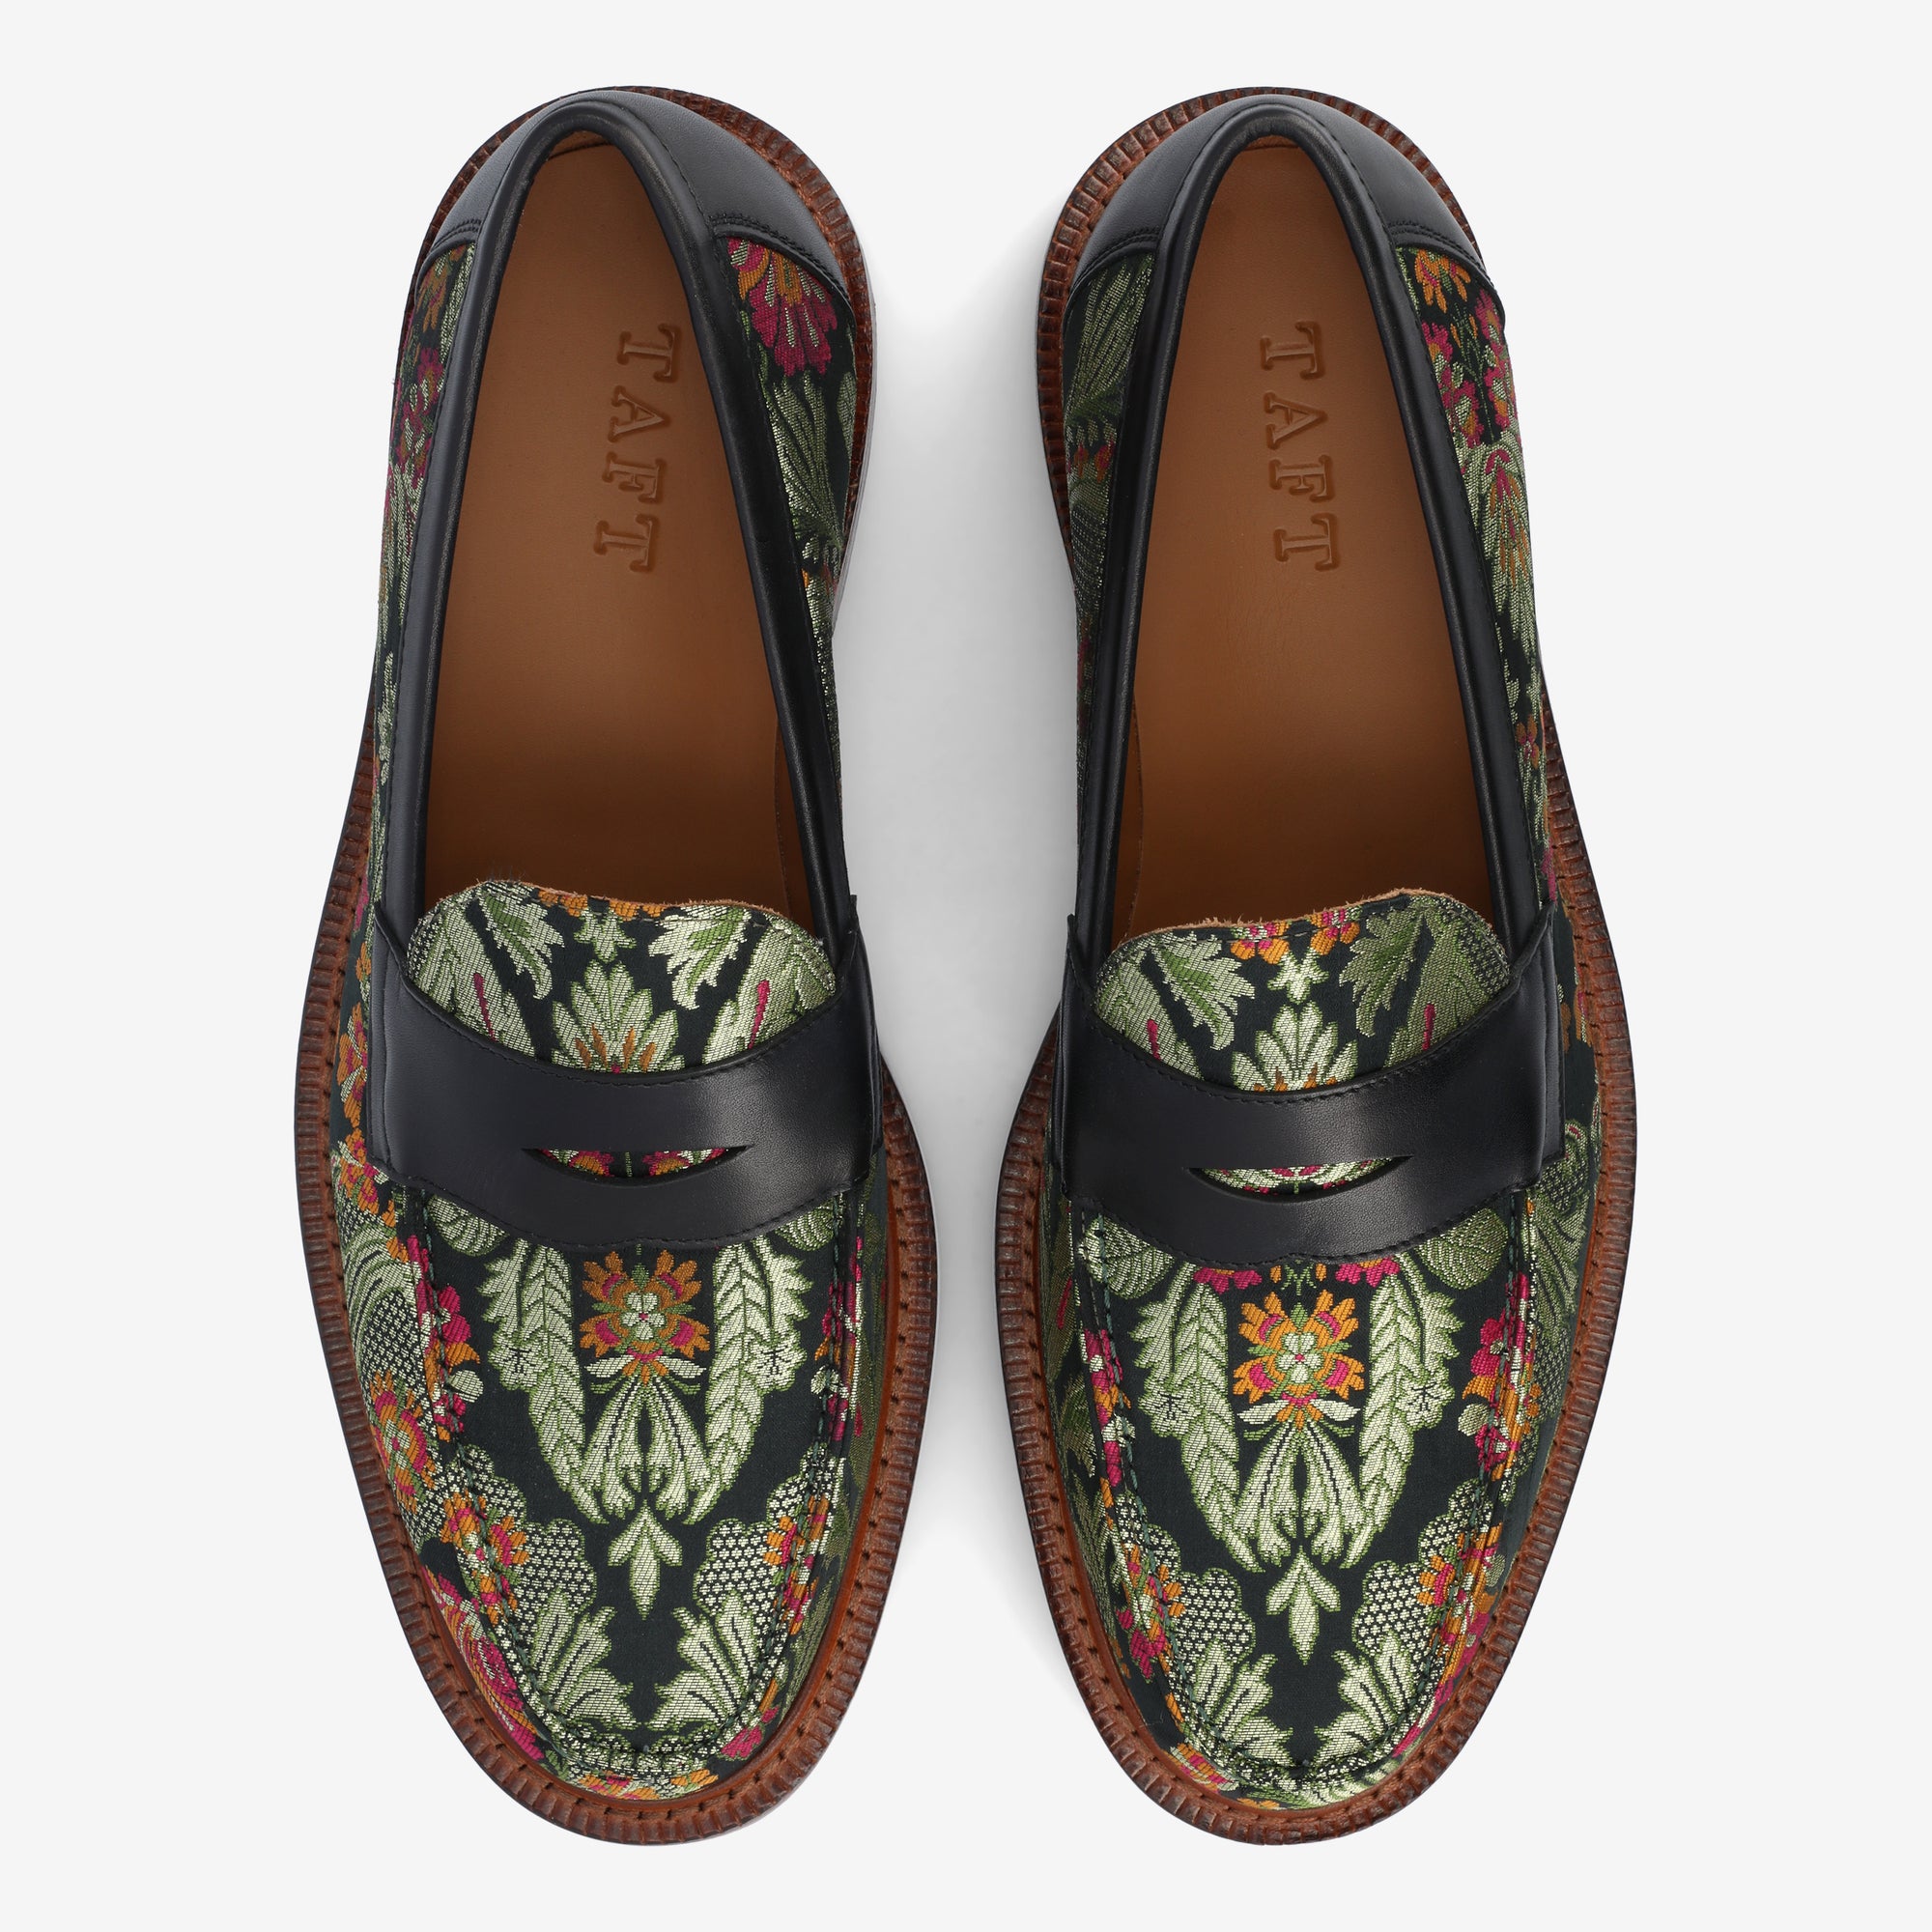 The Fitz Loafer in Victoria (Last Chance, Final Sale)